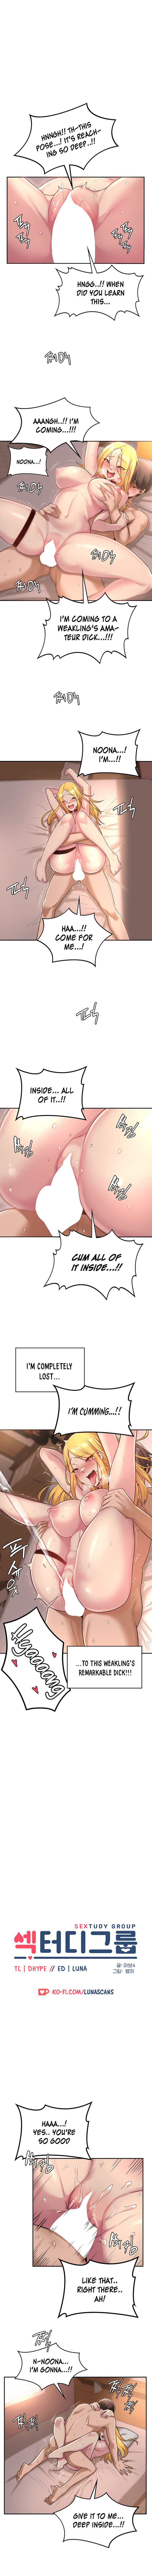 Panel Image 1 for chapter 13 of manhwa Sex Study Group on read.oppai.stream